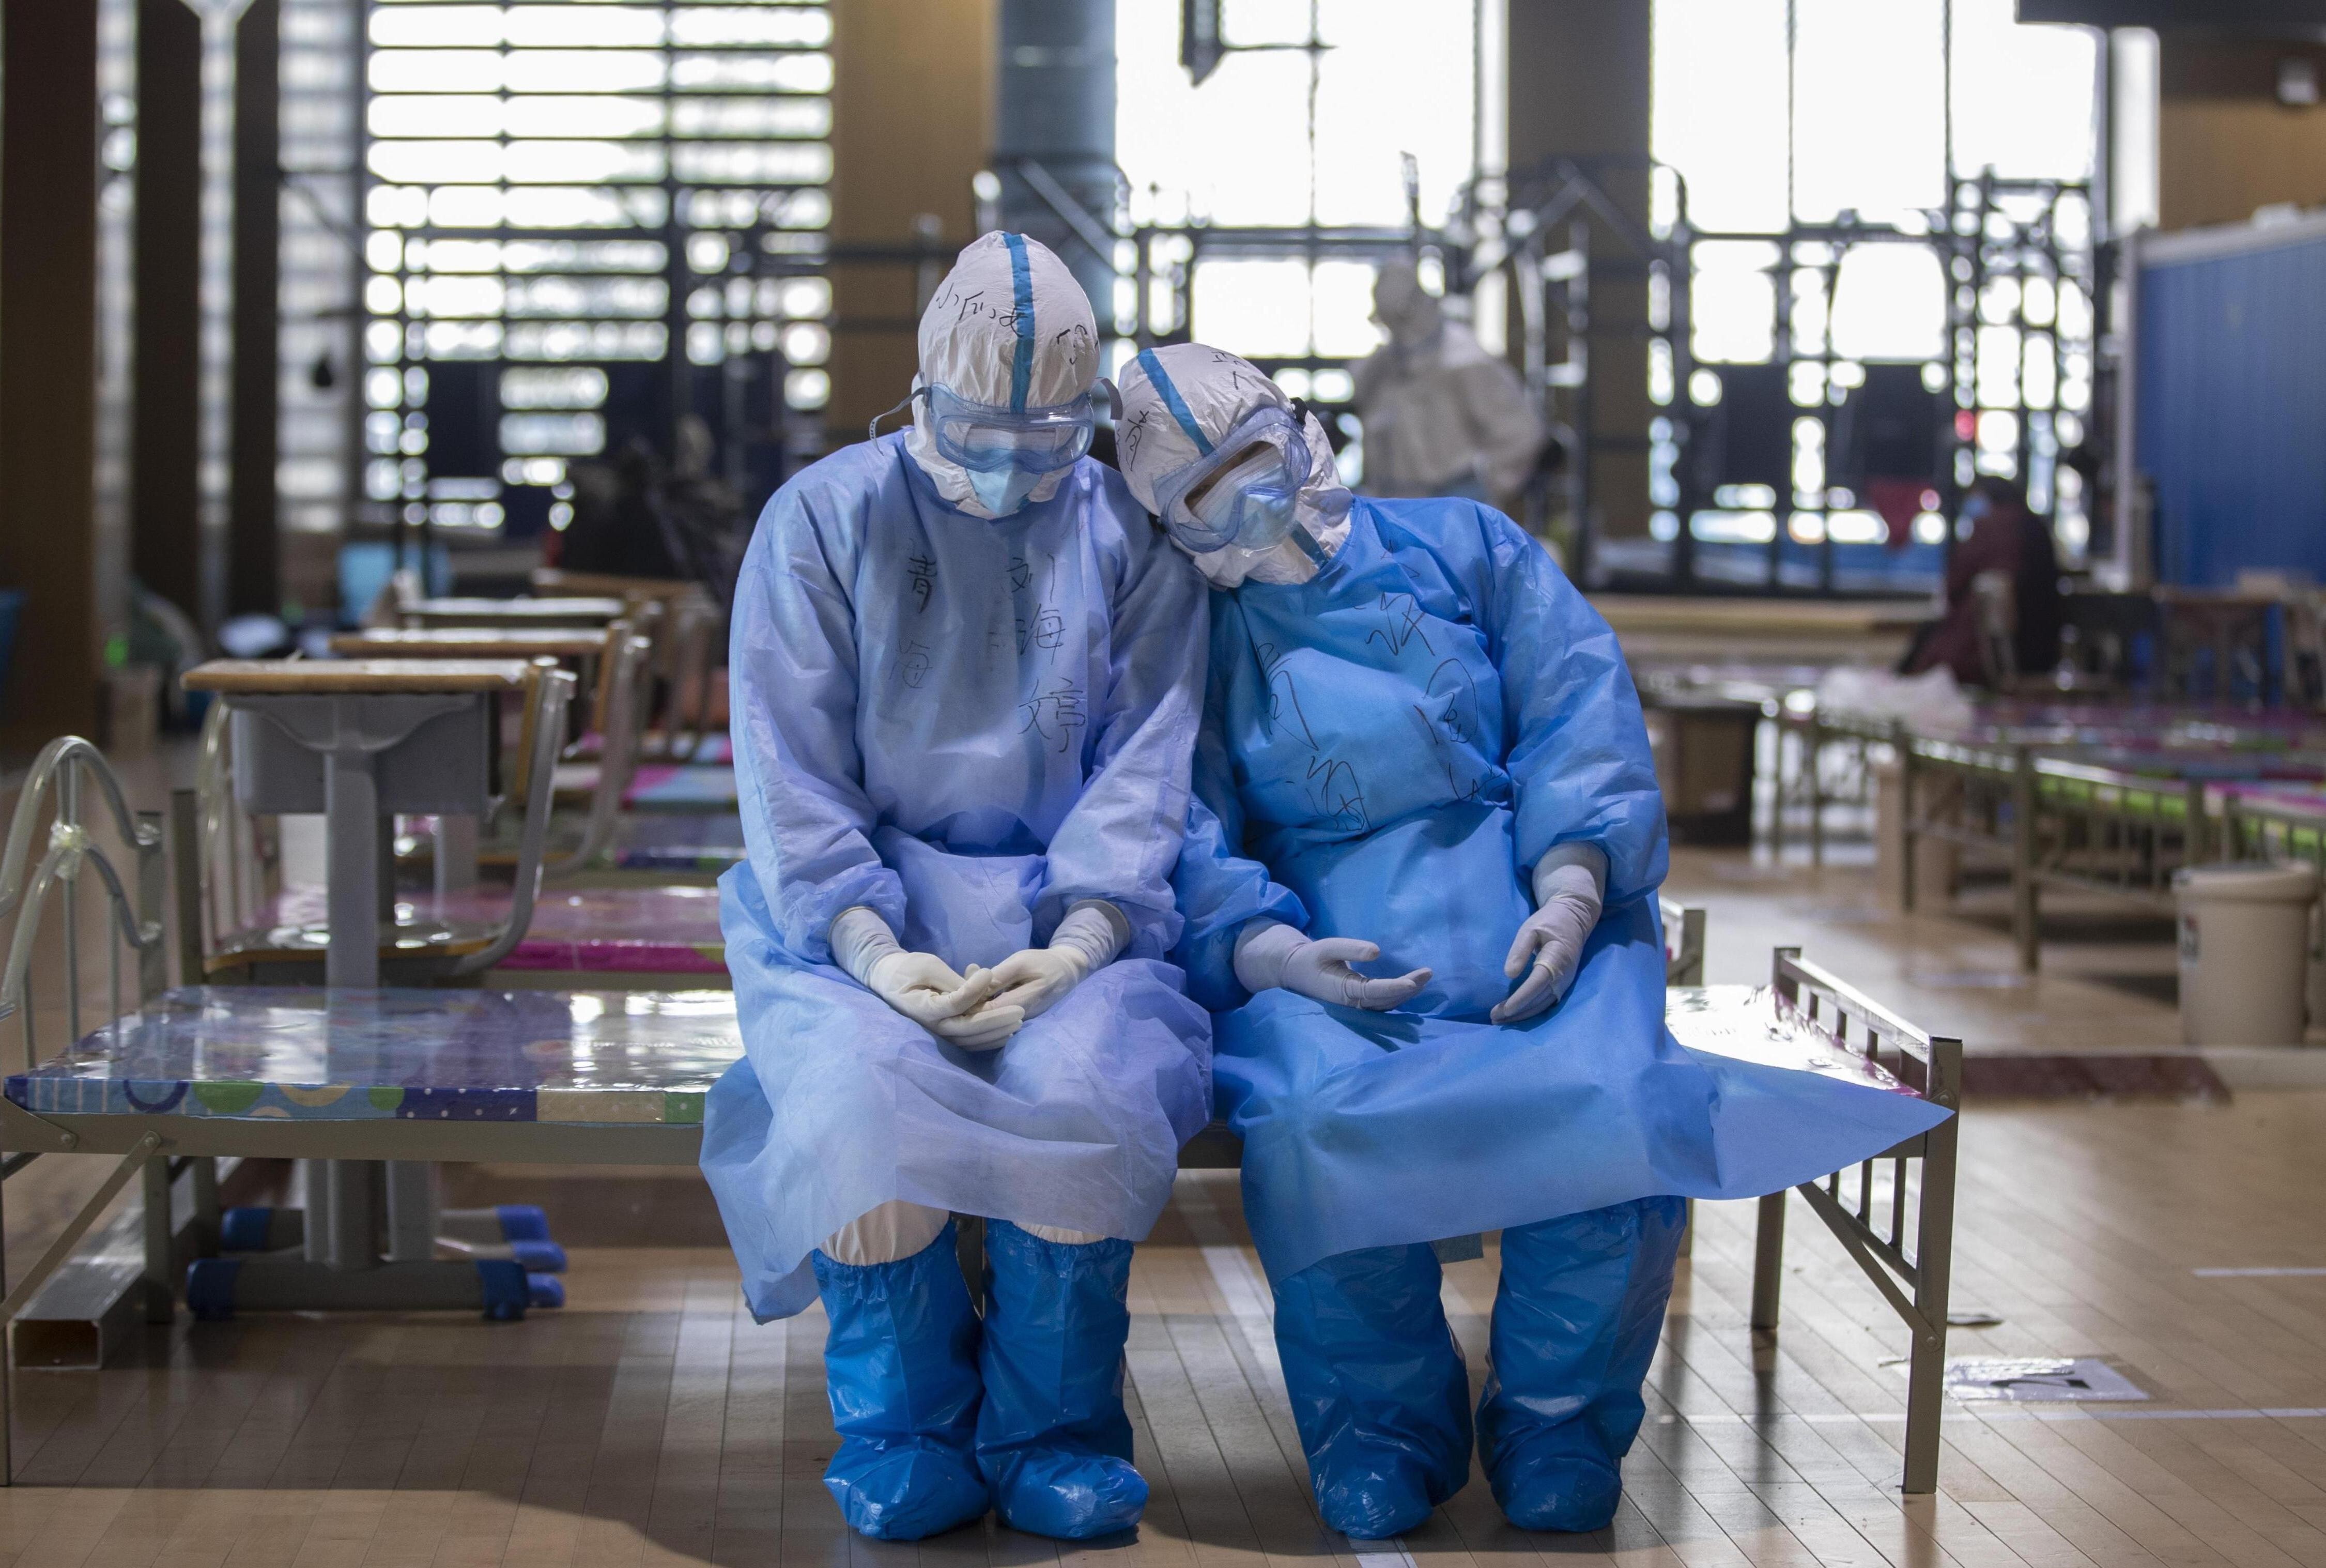 Two medical workers from northwest China’s Qinghai province take a rest before leaving the Wuchang temporary hospital in Wuhan, in central China’s Hubei province, on March 10. Photo: Xinhua